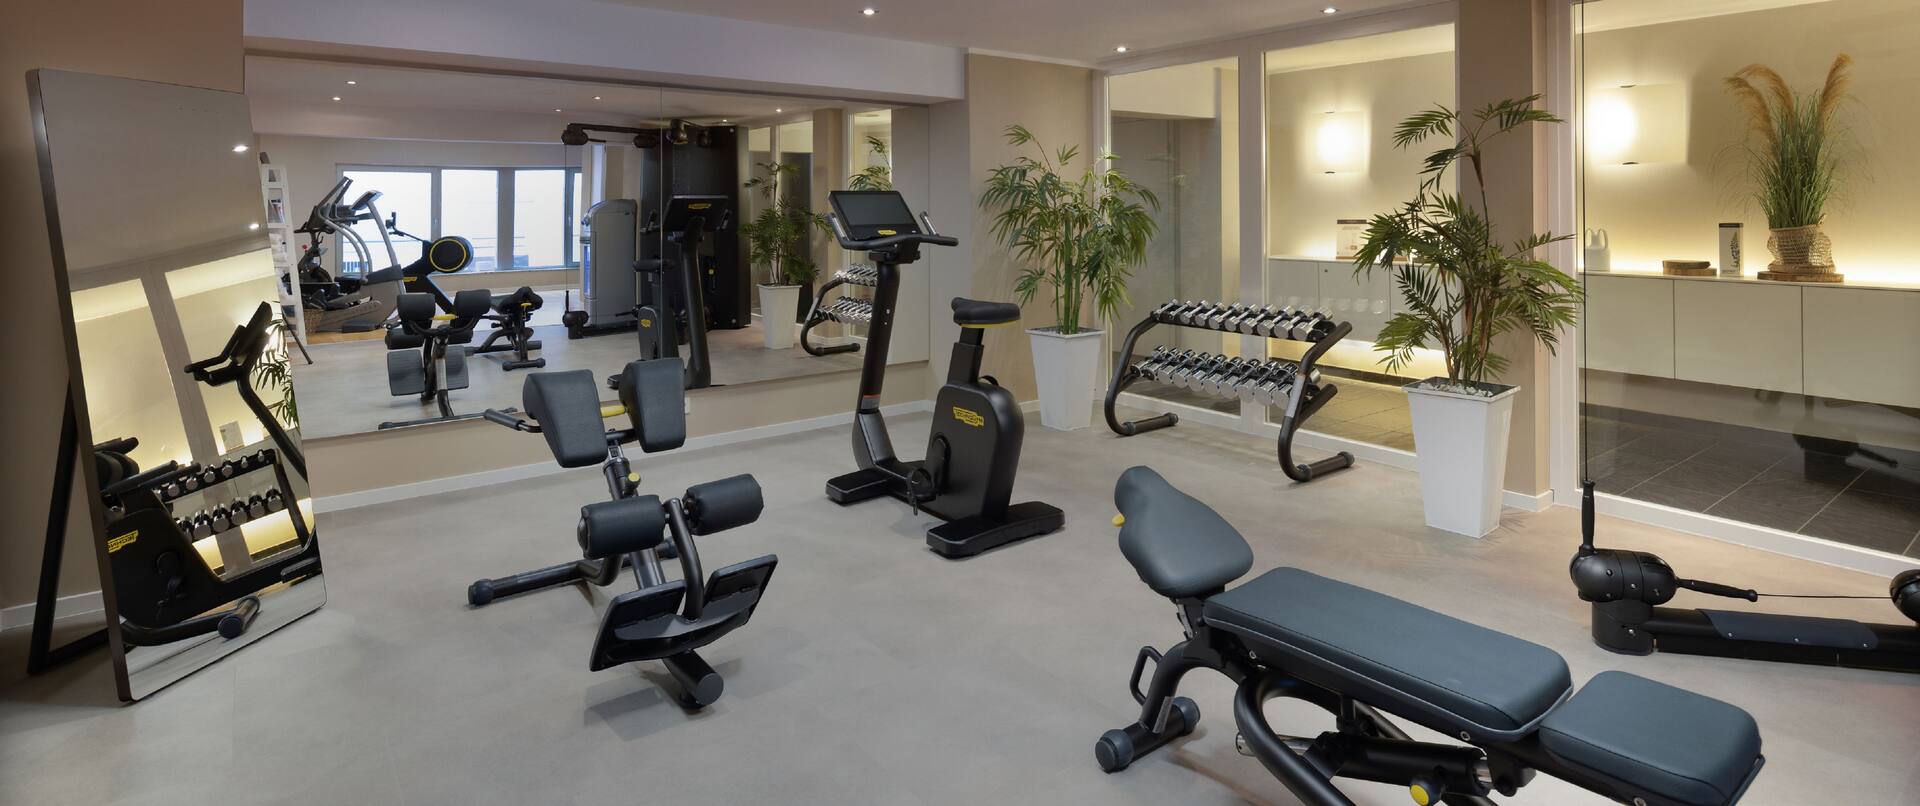 Fitness Room with Weights and other Exercise Equipment